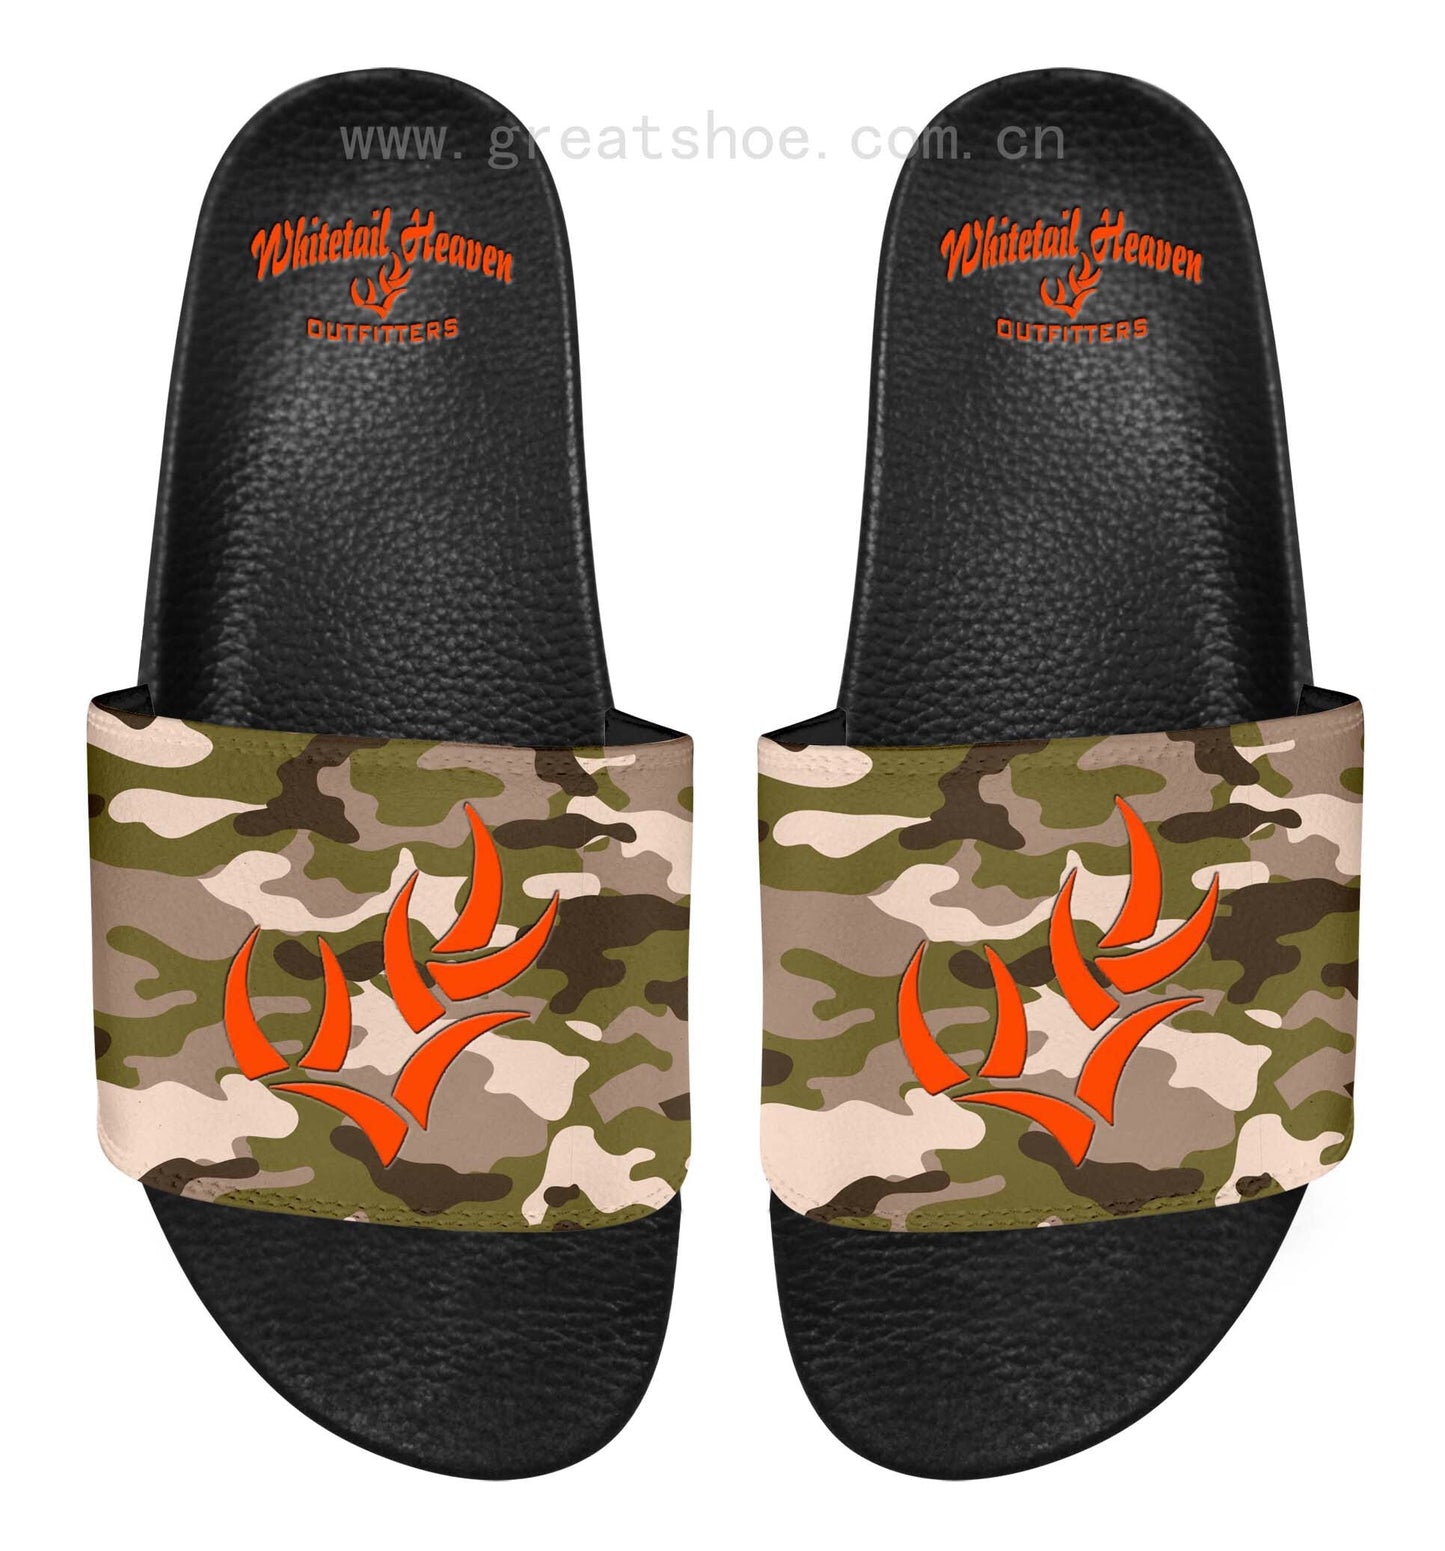 WHITETAIL HEAVEN’S UNLEASHED TEAM SLIDE SANDALS